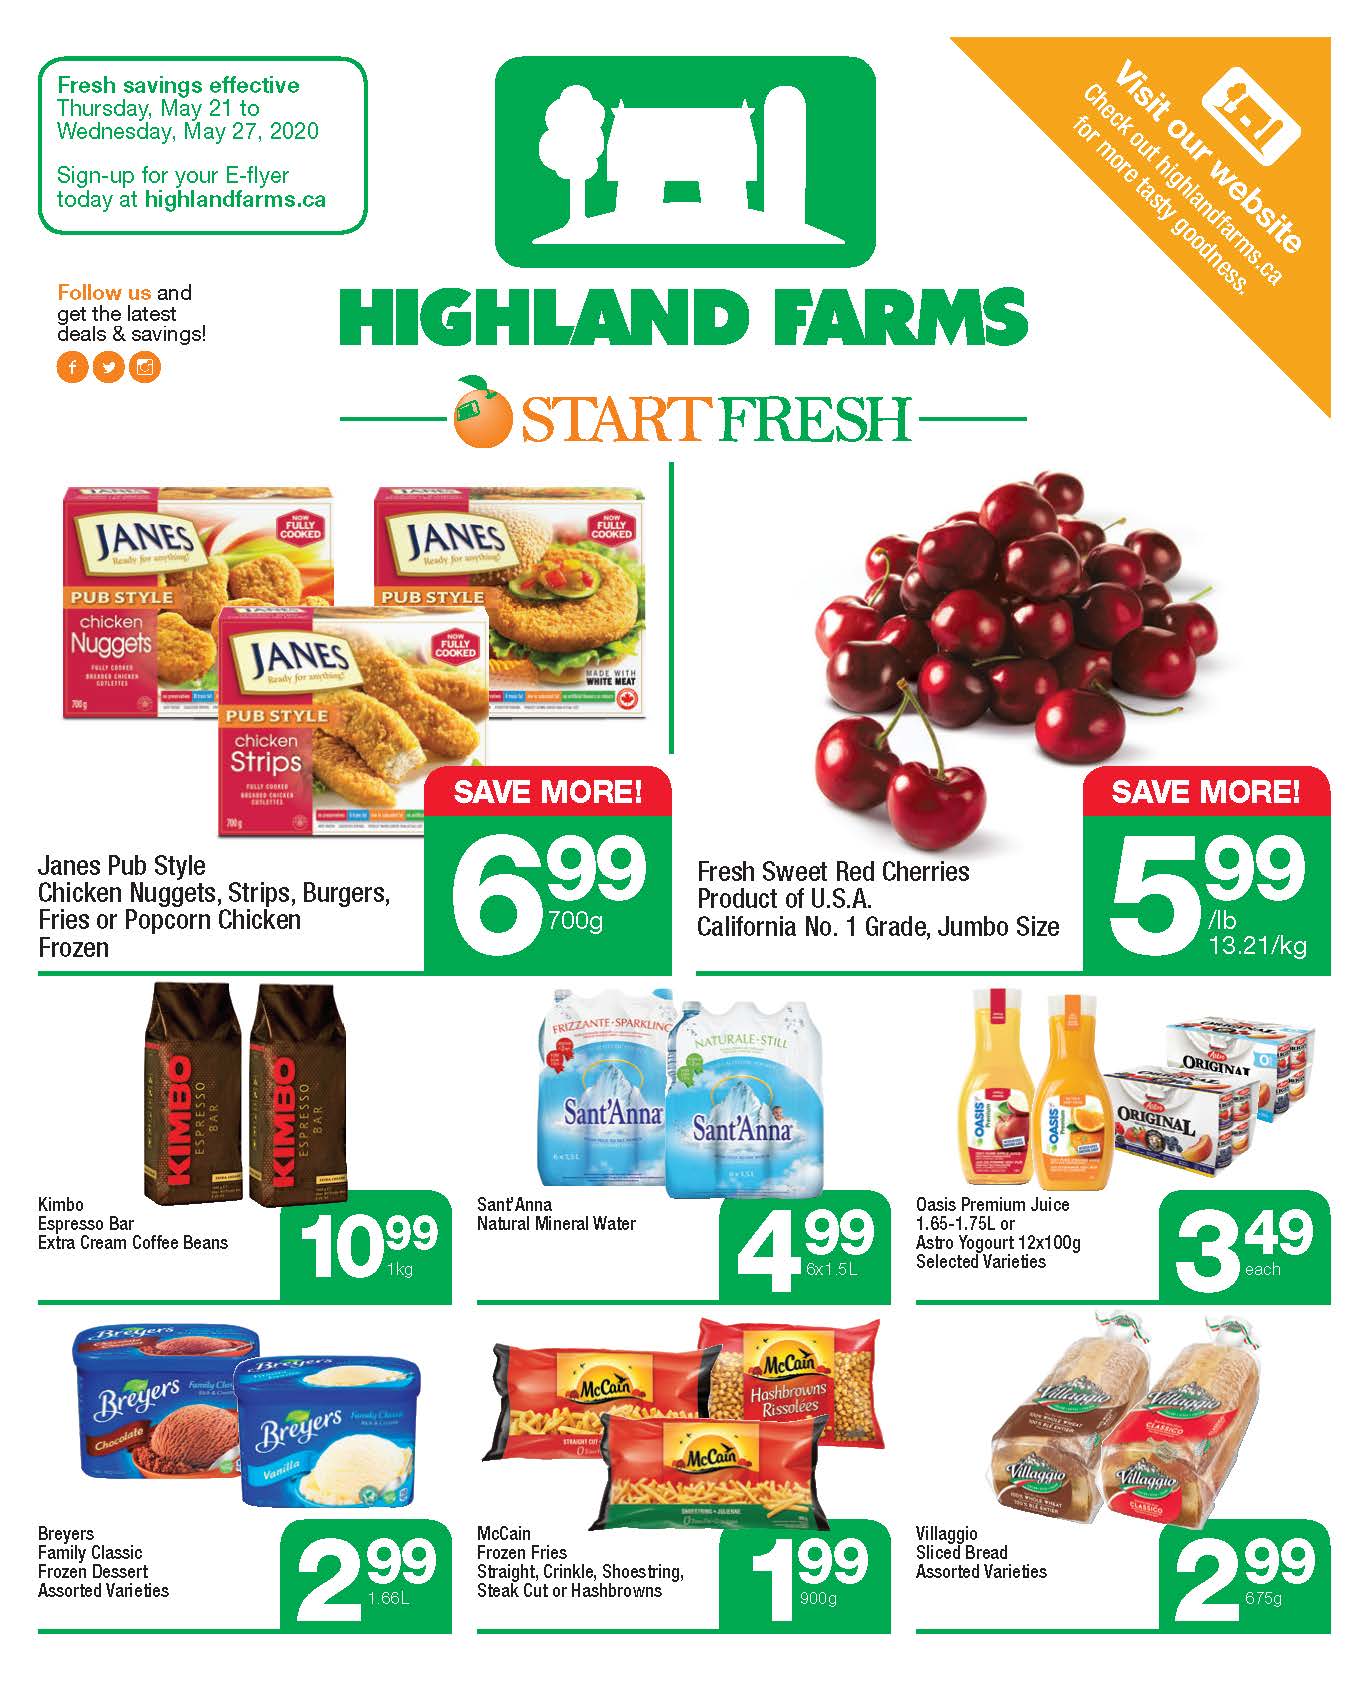 highland-farms-flyer-wednesday-may-20-2020-2020-5-22